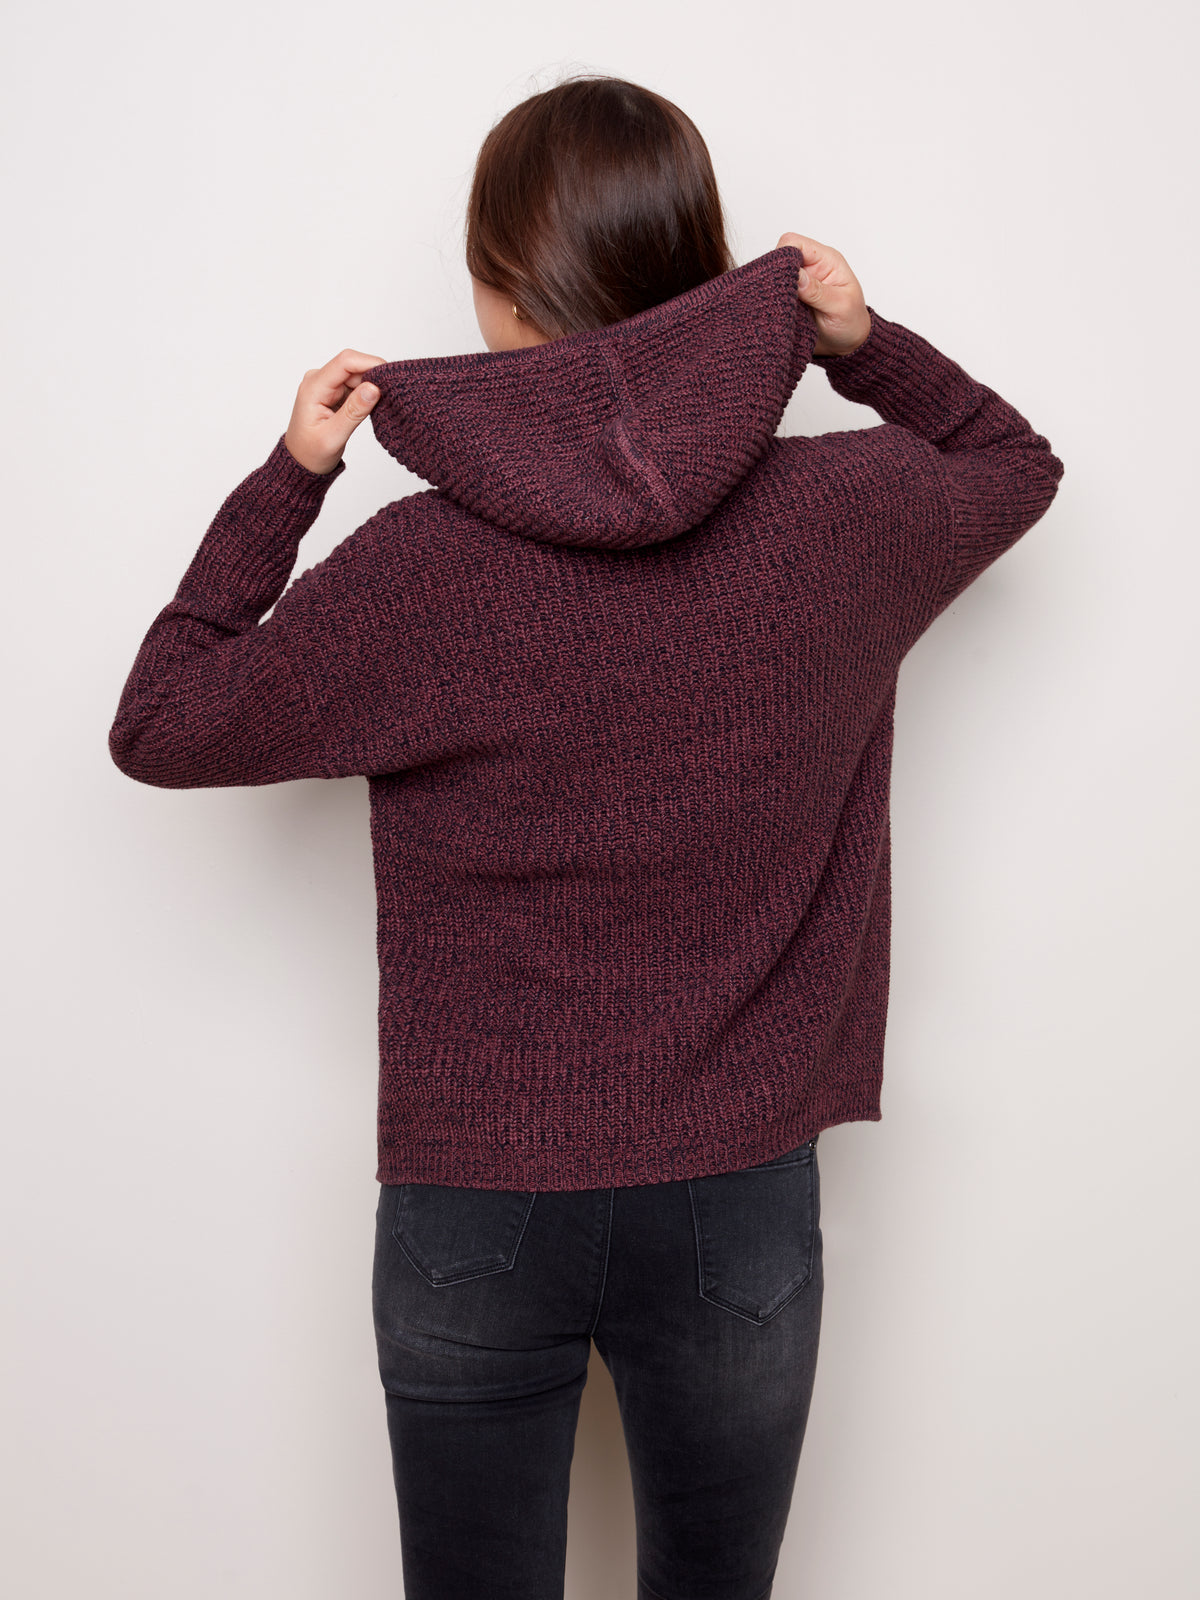 The Felicity Hooded Sweater